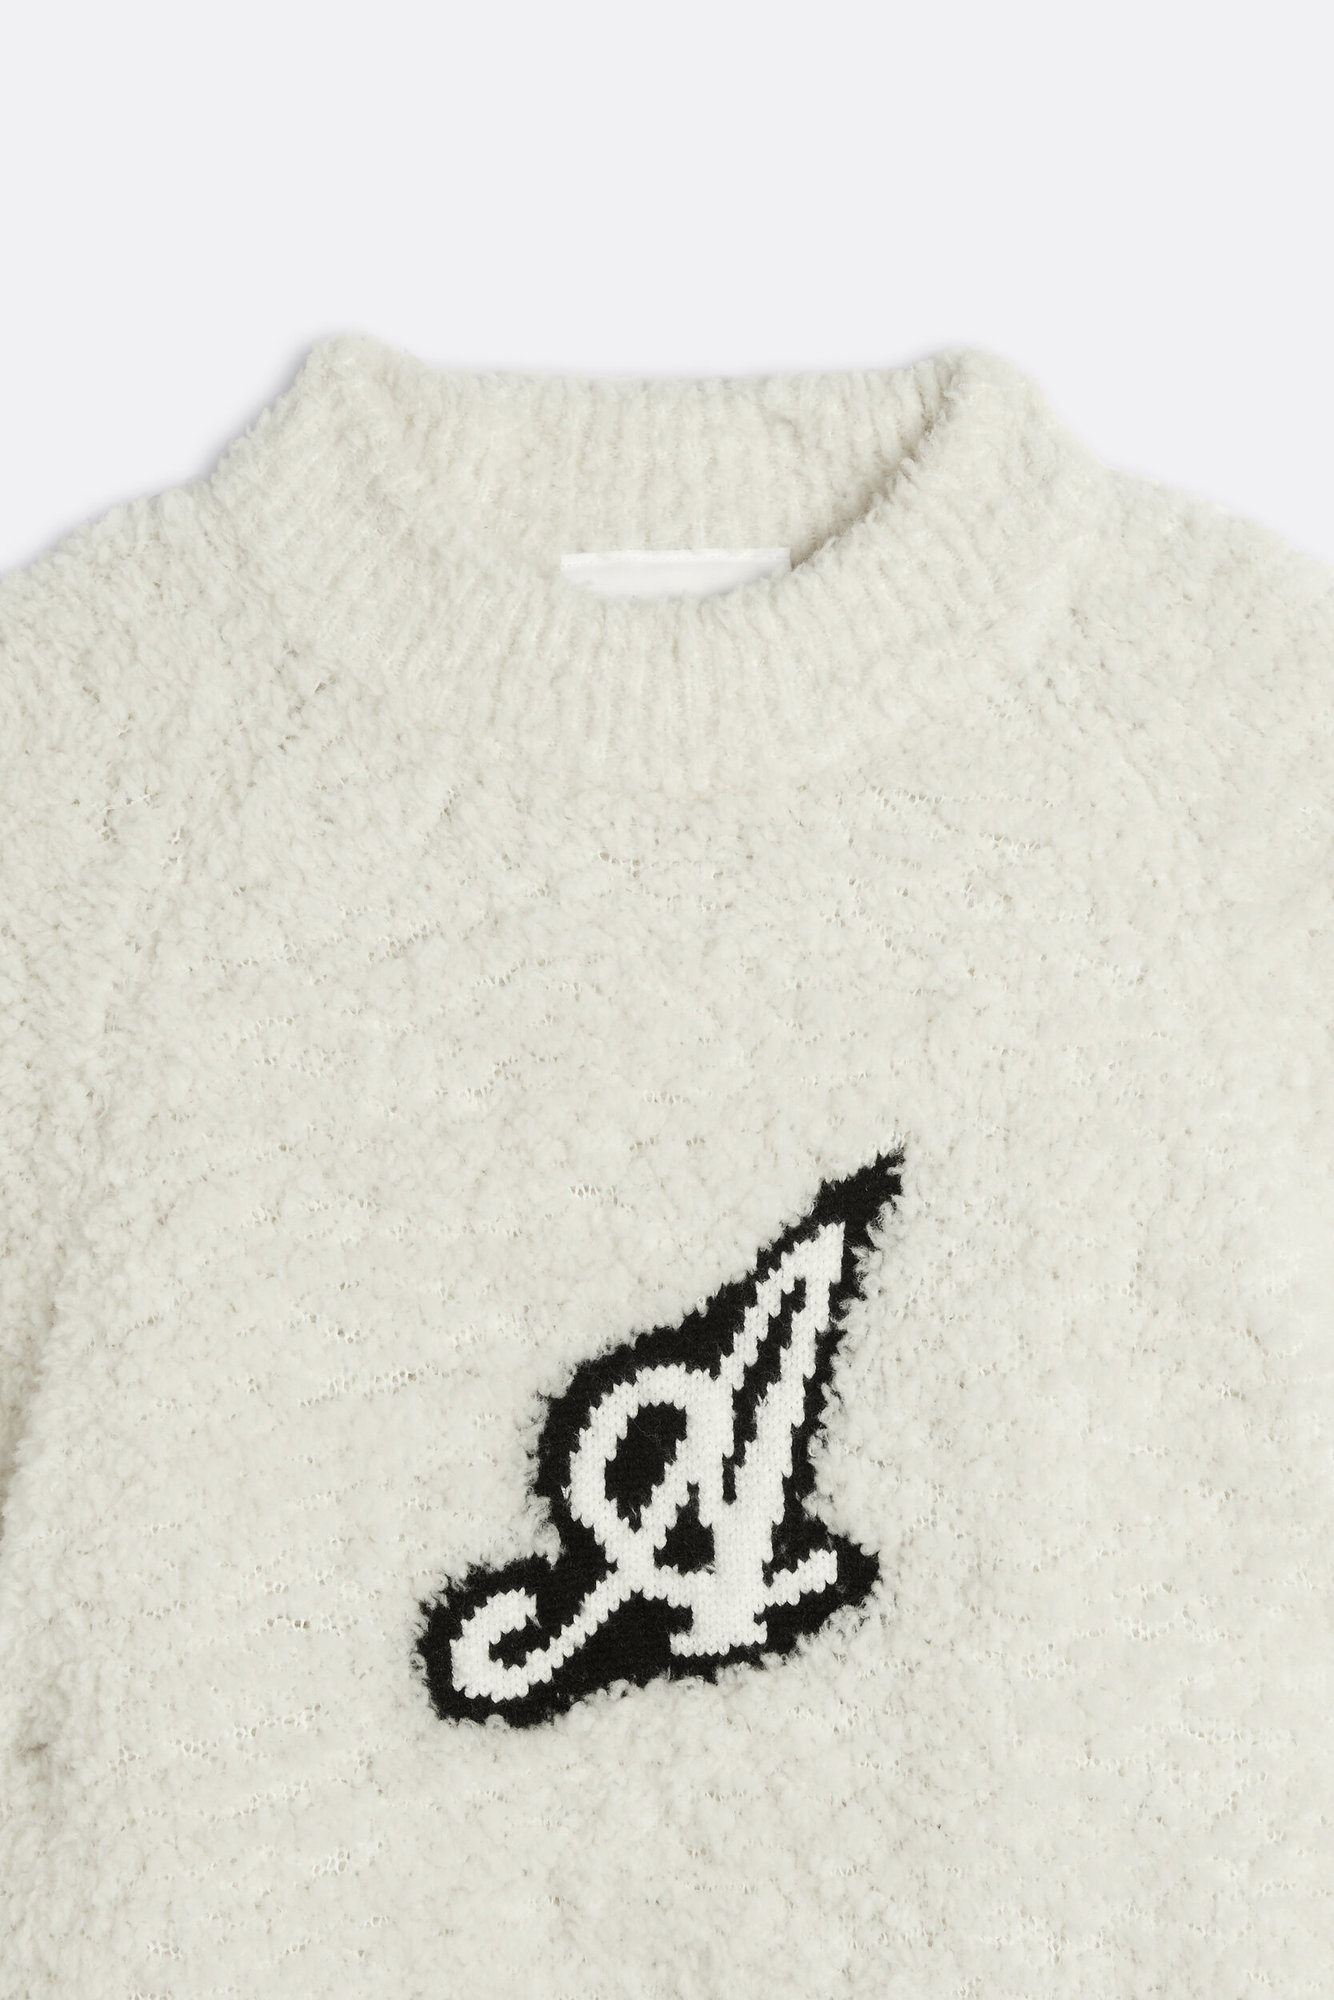 Roots Sweater